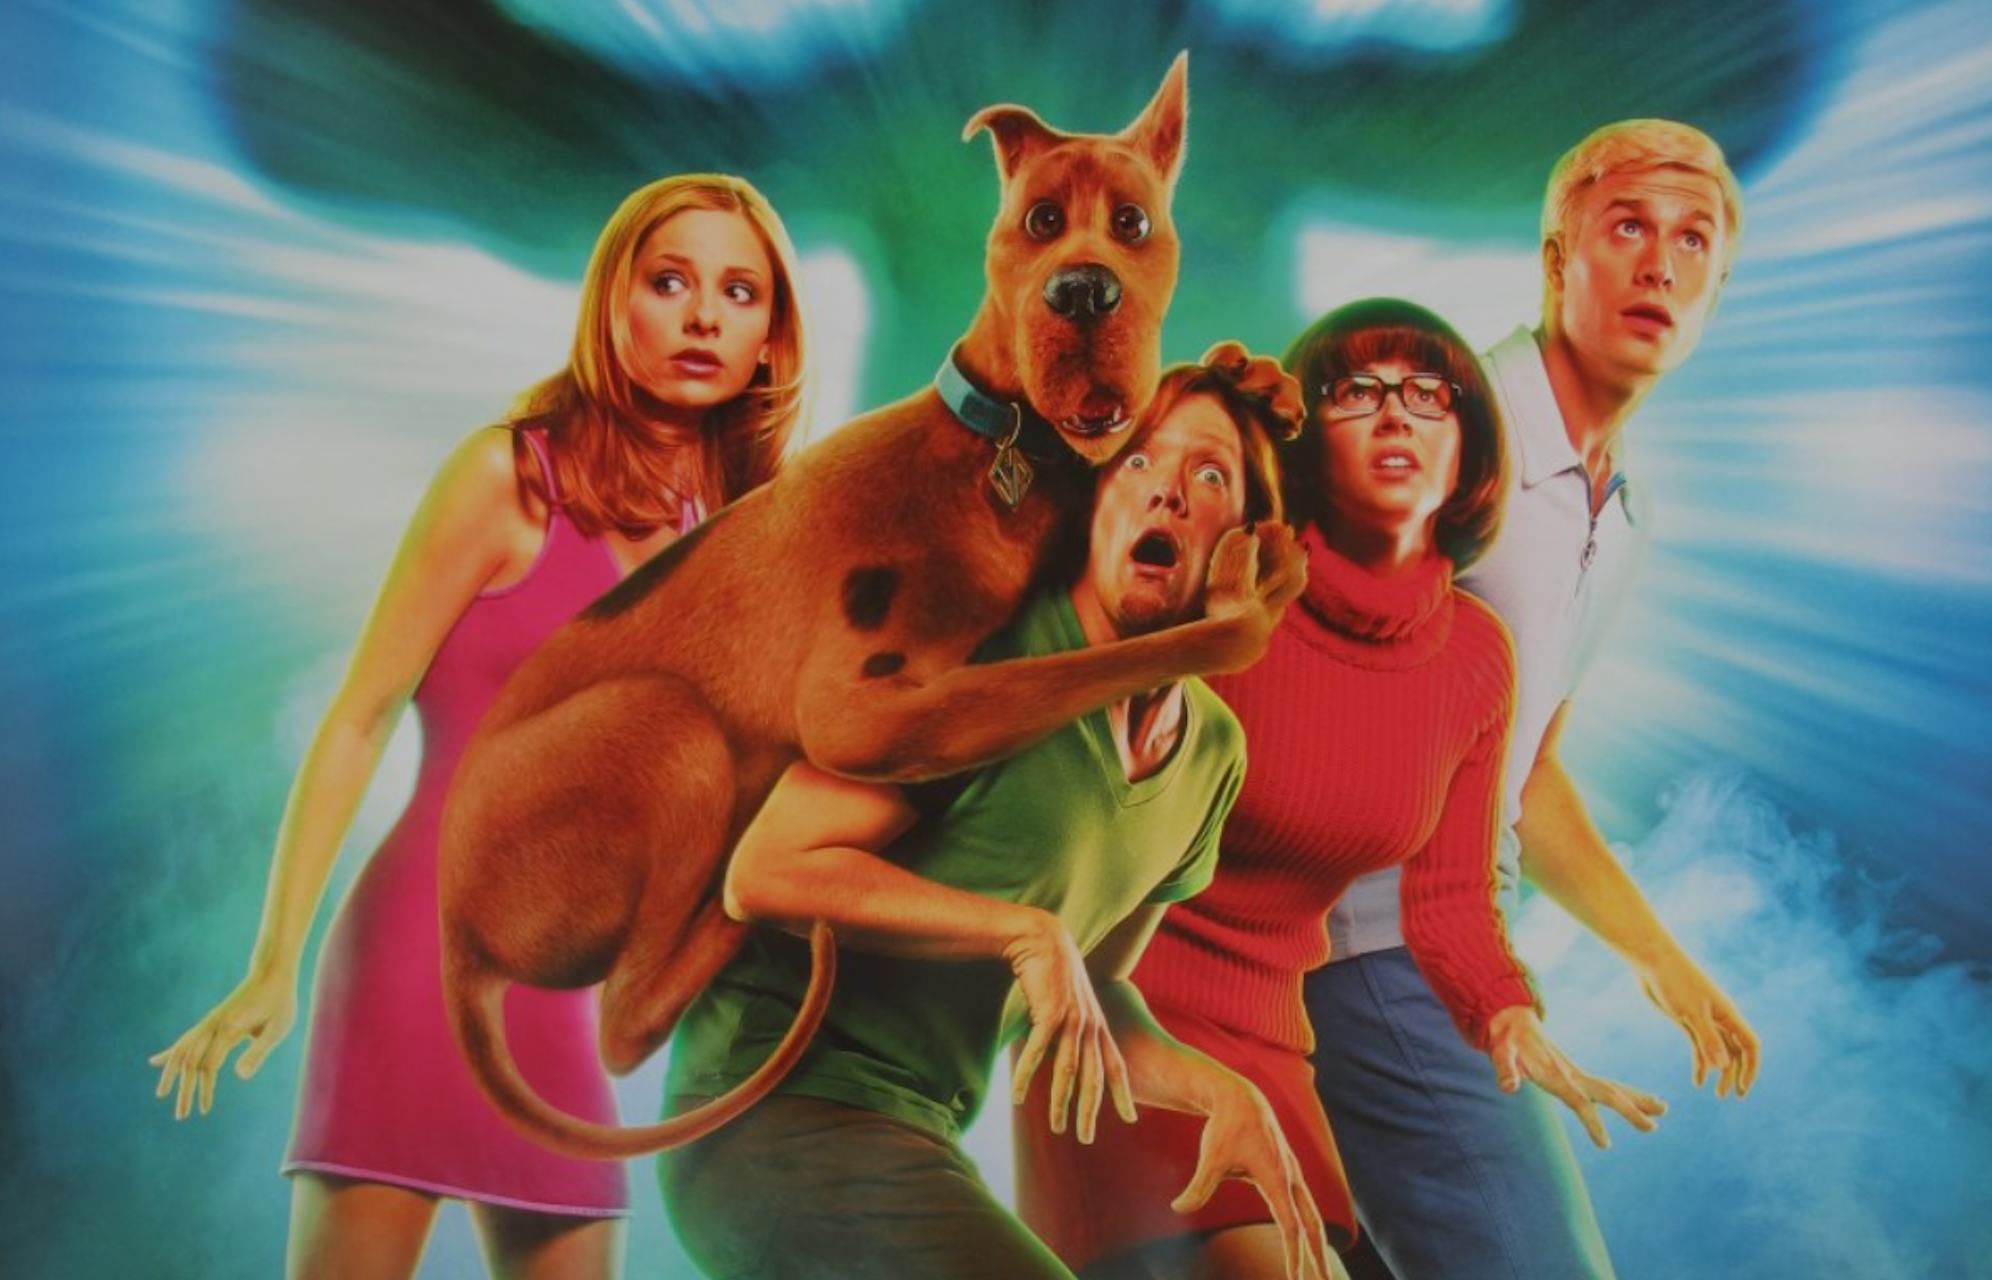 Netflix Scooby Doo July 2018 In Defense Of The Poorly Reviewed 2002 Film